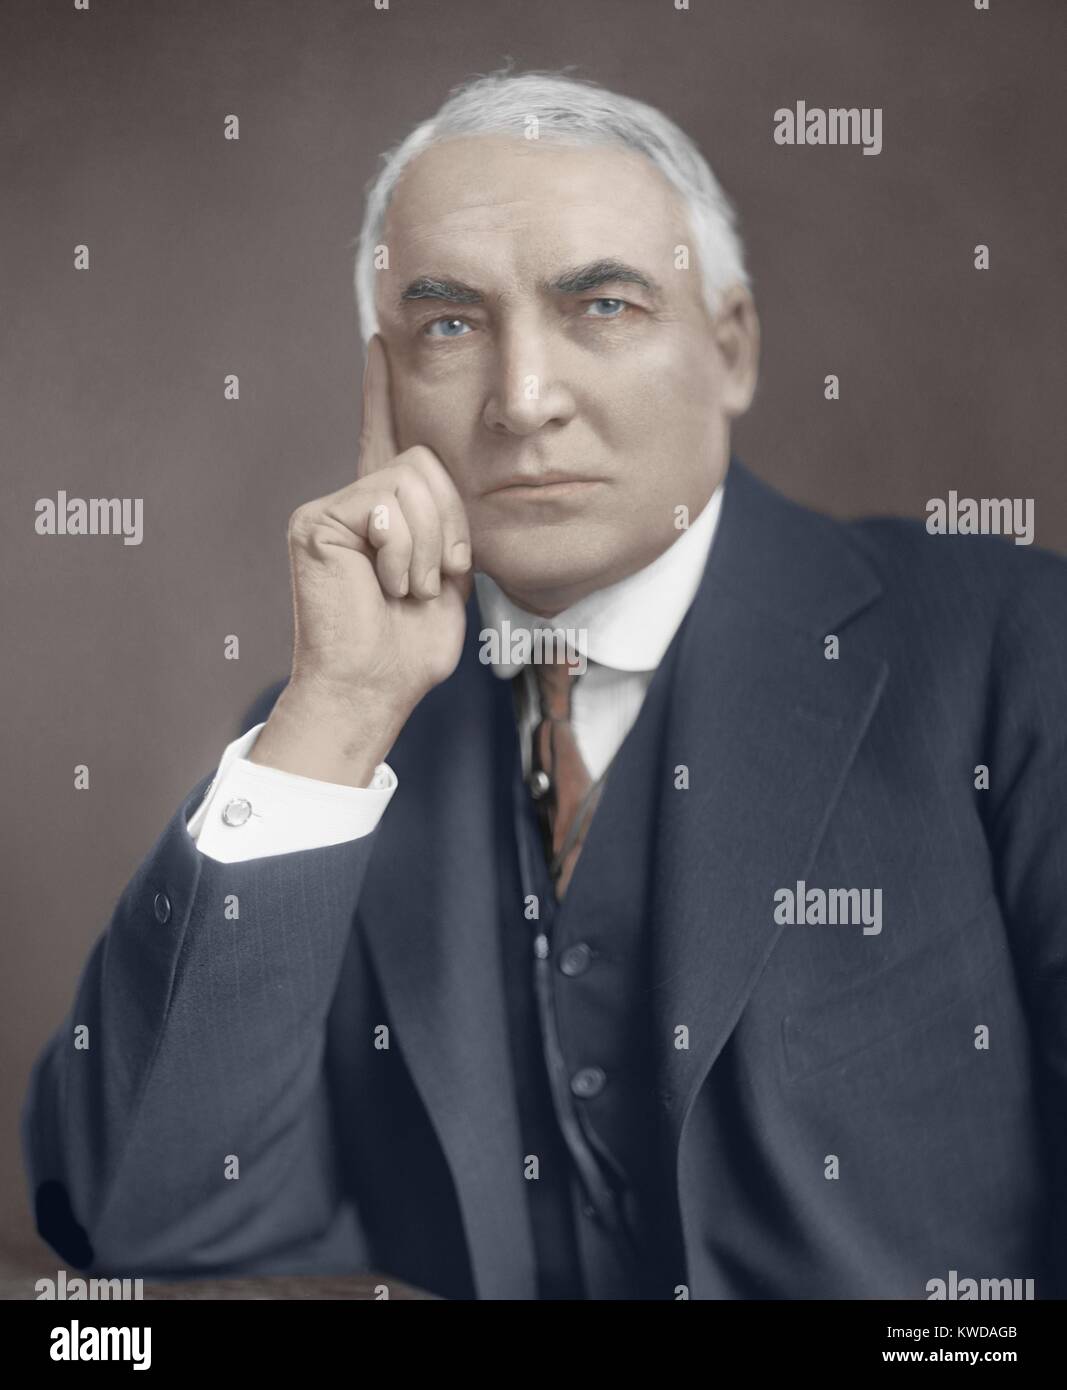 President Warren Harding, ca. 1921-23. He was President for less than two and half years when he died during a tour of Alaska and the Western states on August 2, 1923. Studio portrait with digital color (BSLOC 2016 9 11)DUPLICATE REMOVED: SHOULD HAVE BEEN '7 Continents History', AS PER Barbara Schultz - DD Stock Photo